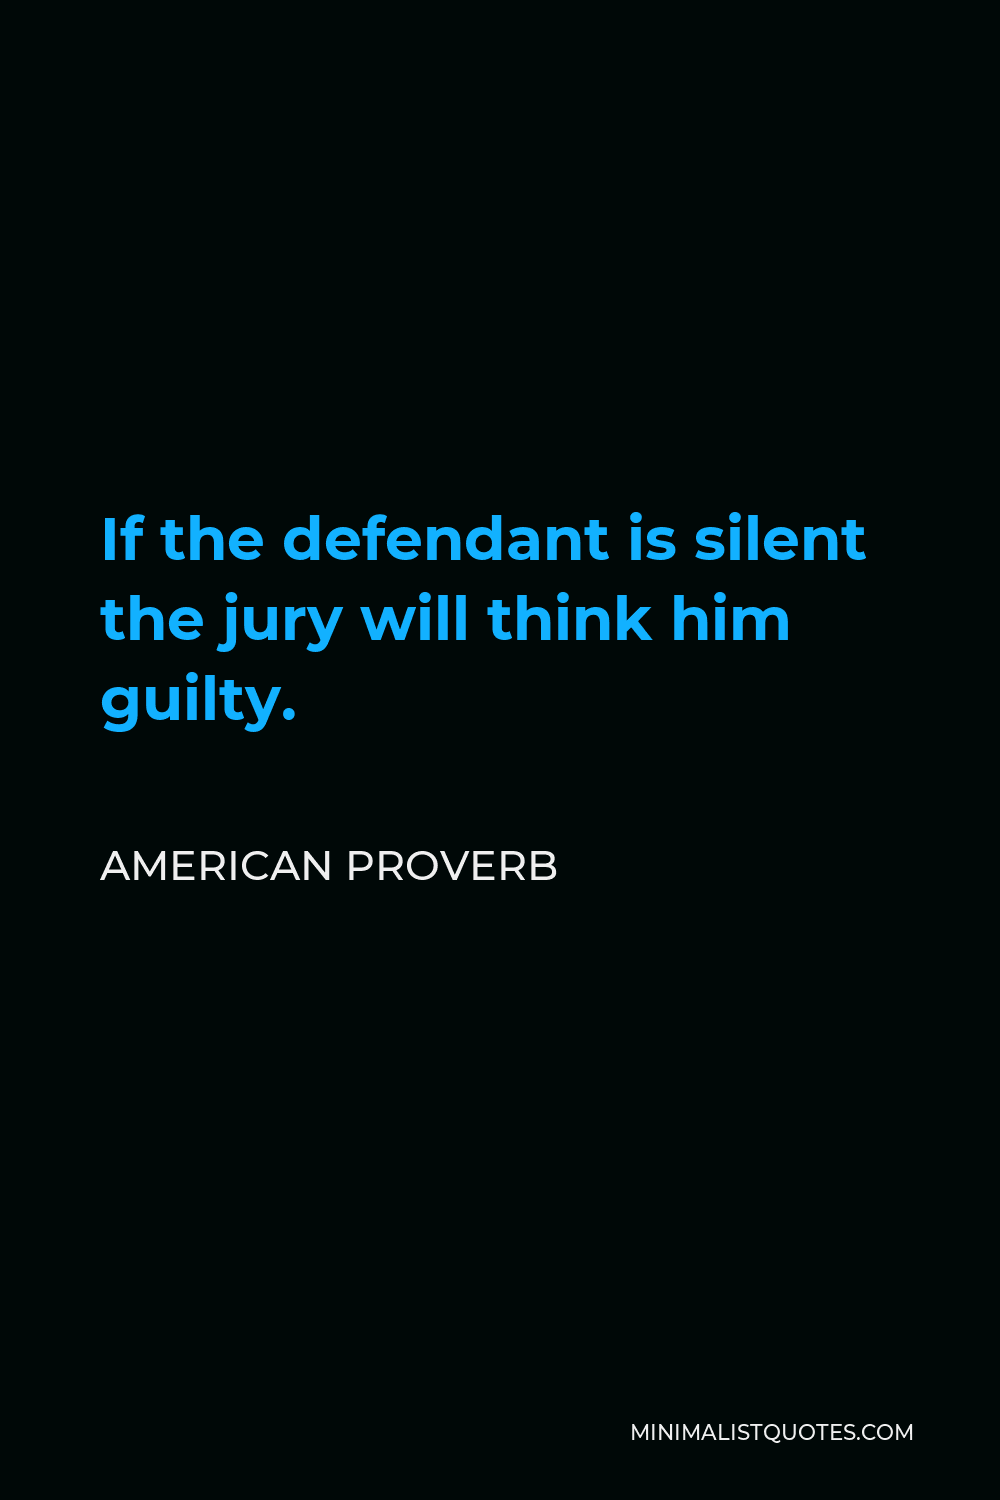 American Proverb Quote - If the defendant is silent the jury will think him guilty.